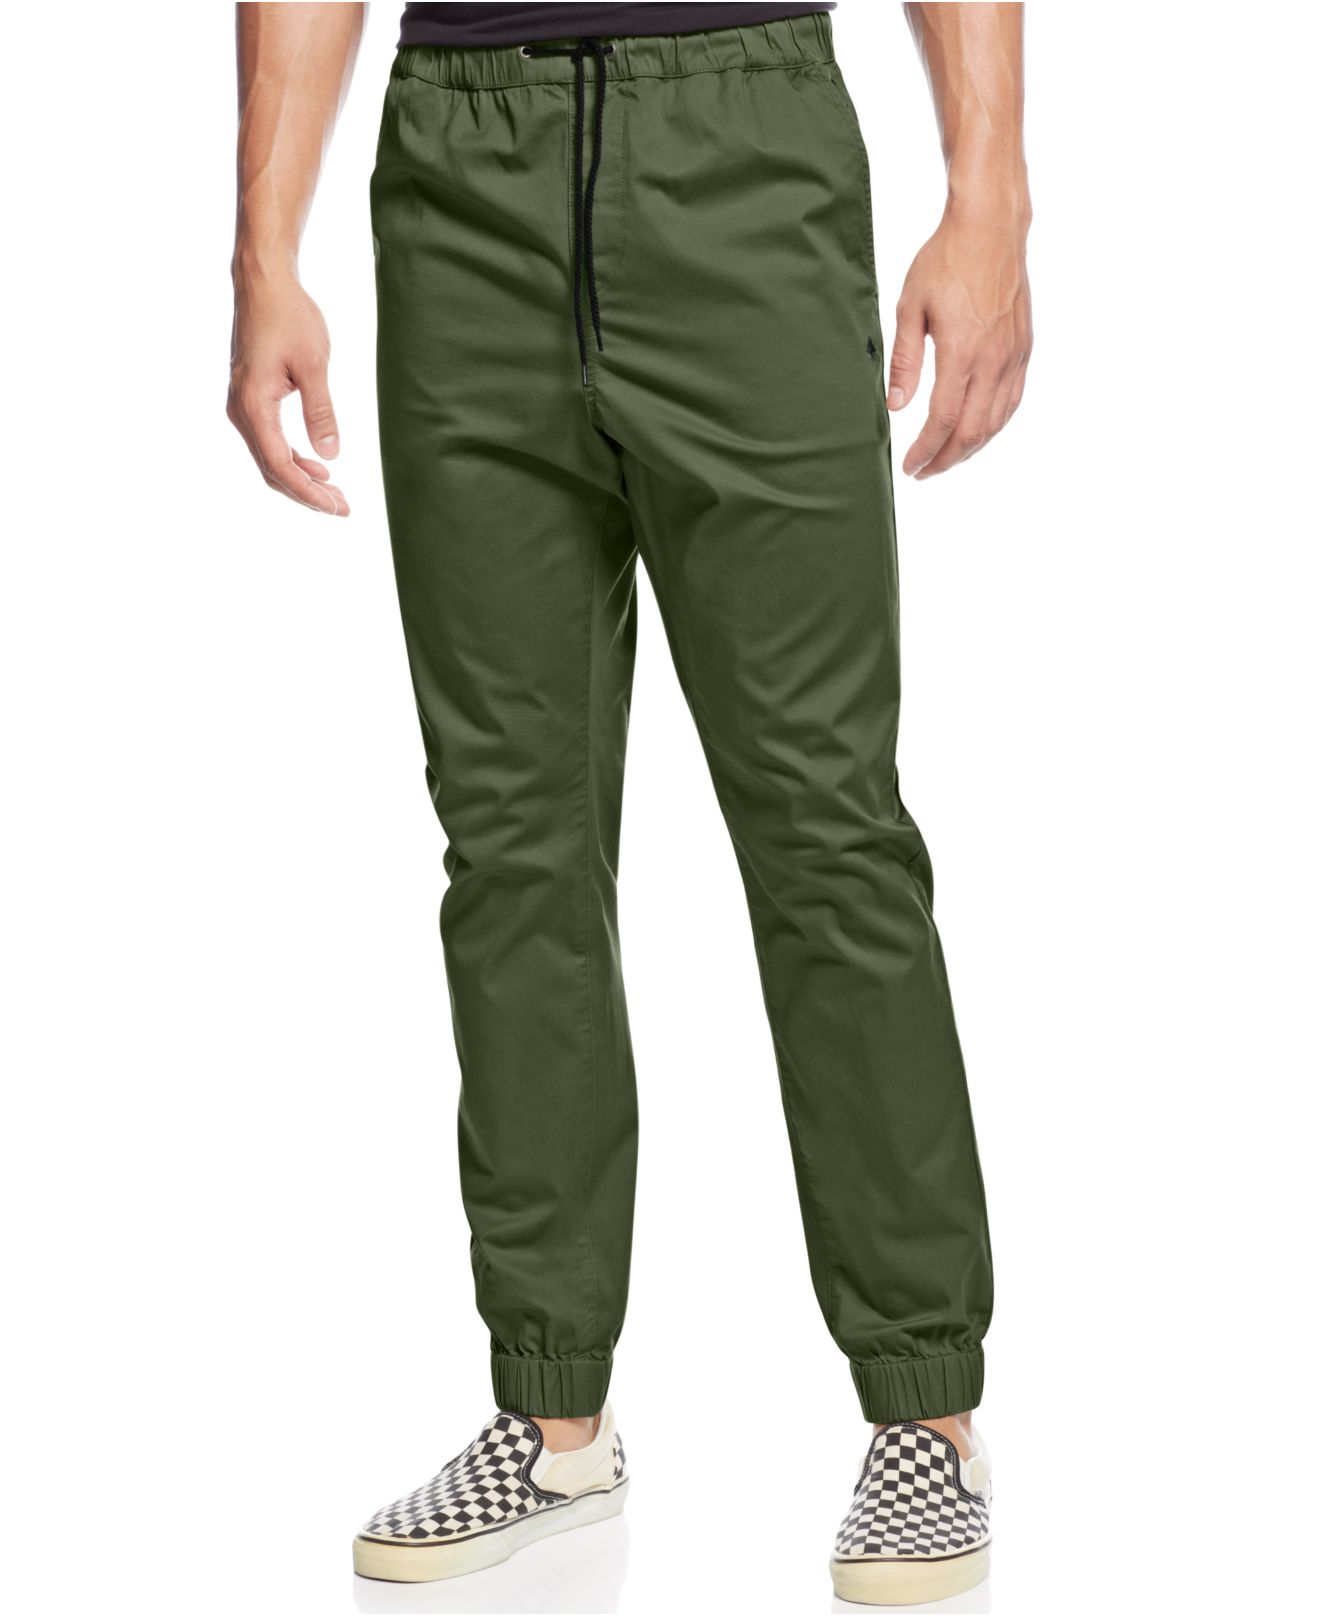 Lrg Big And Tall Gamechanger Joggers in Green for Men (Olive) Lyst